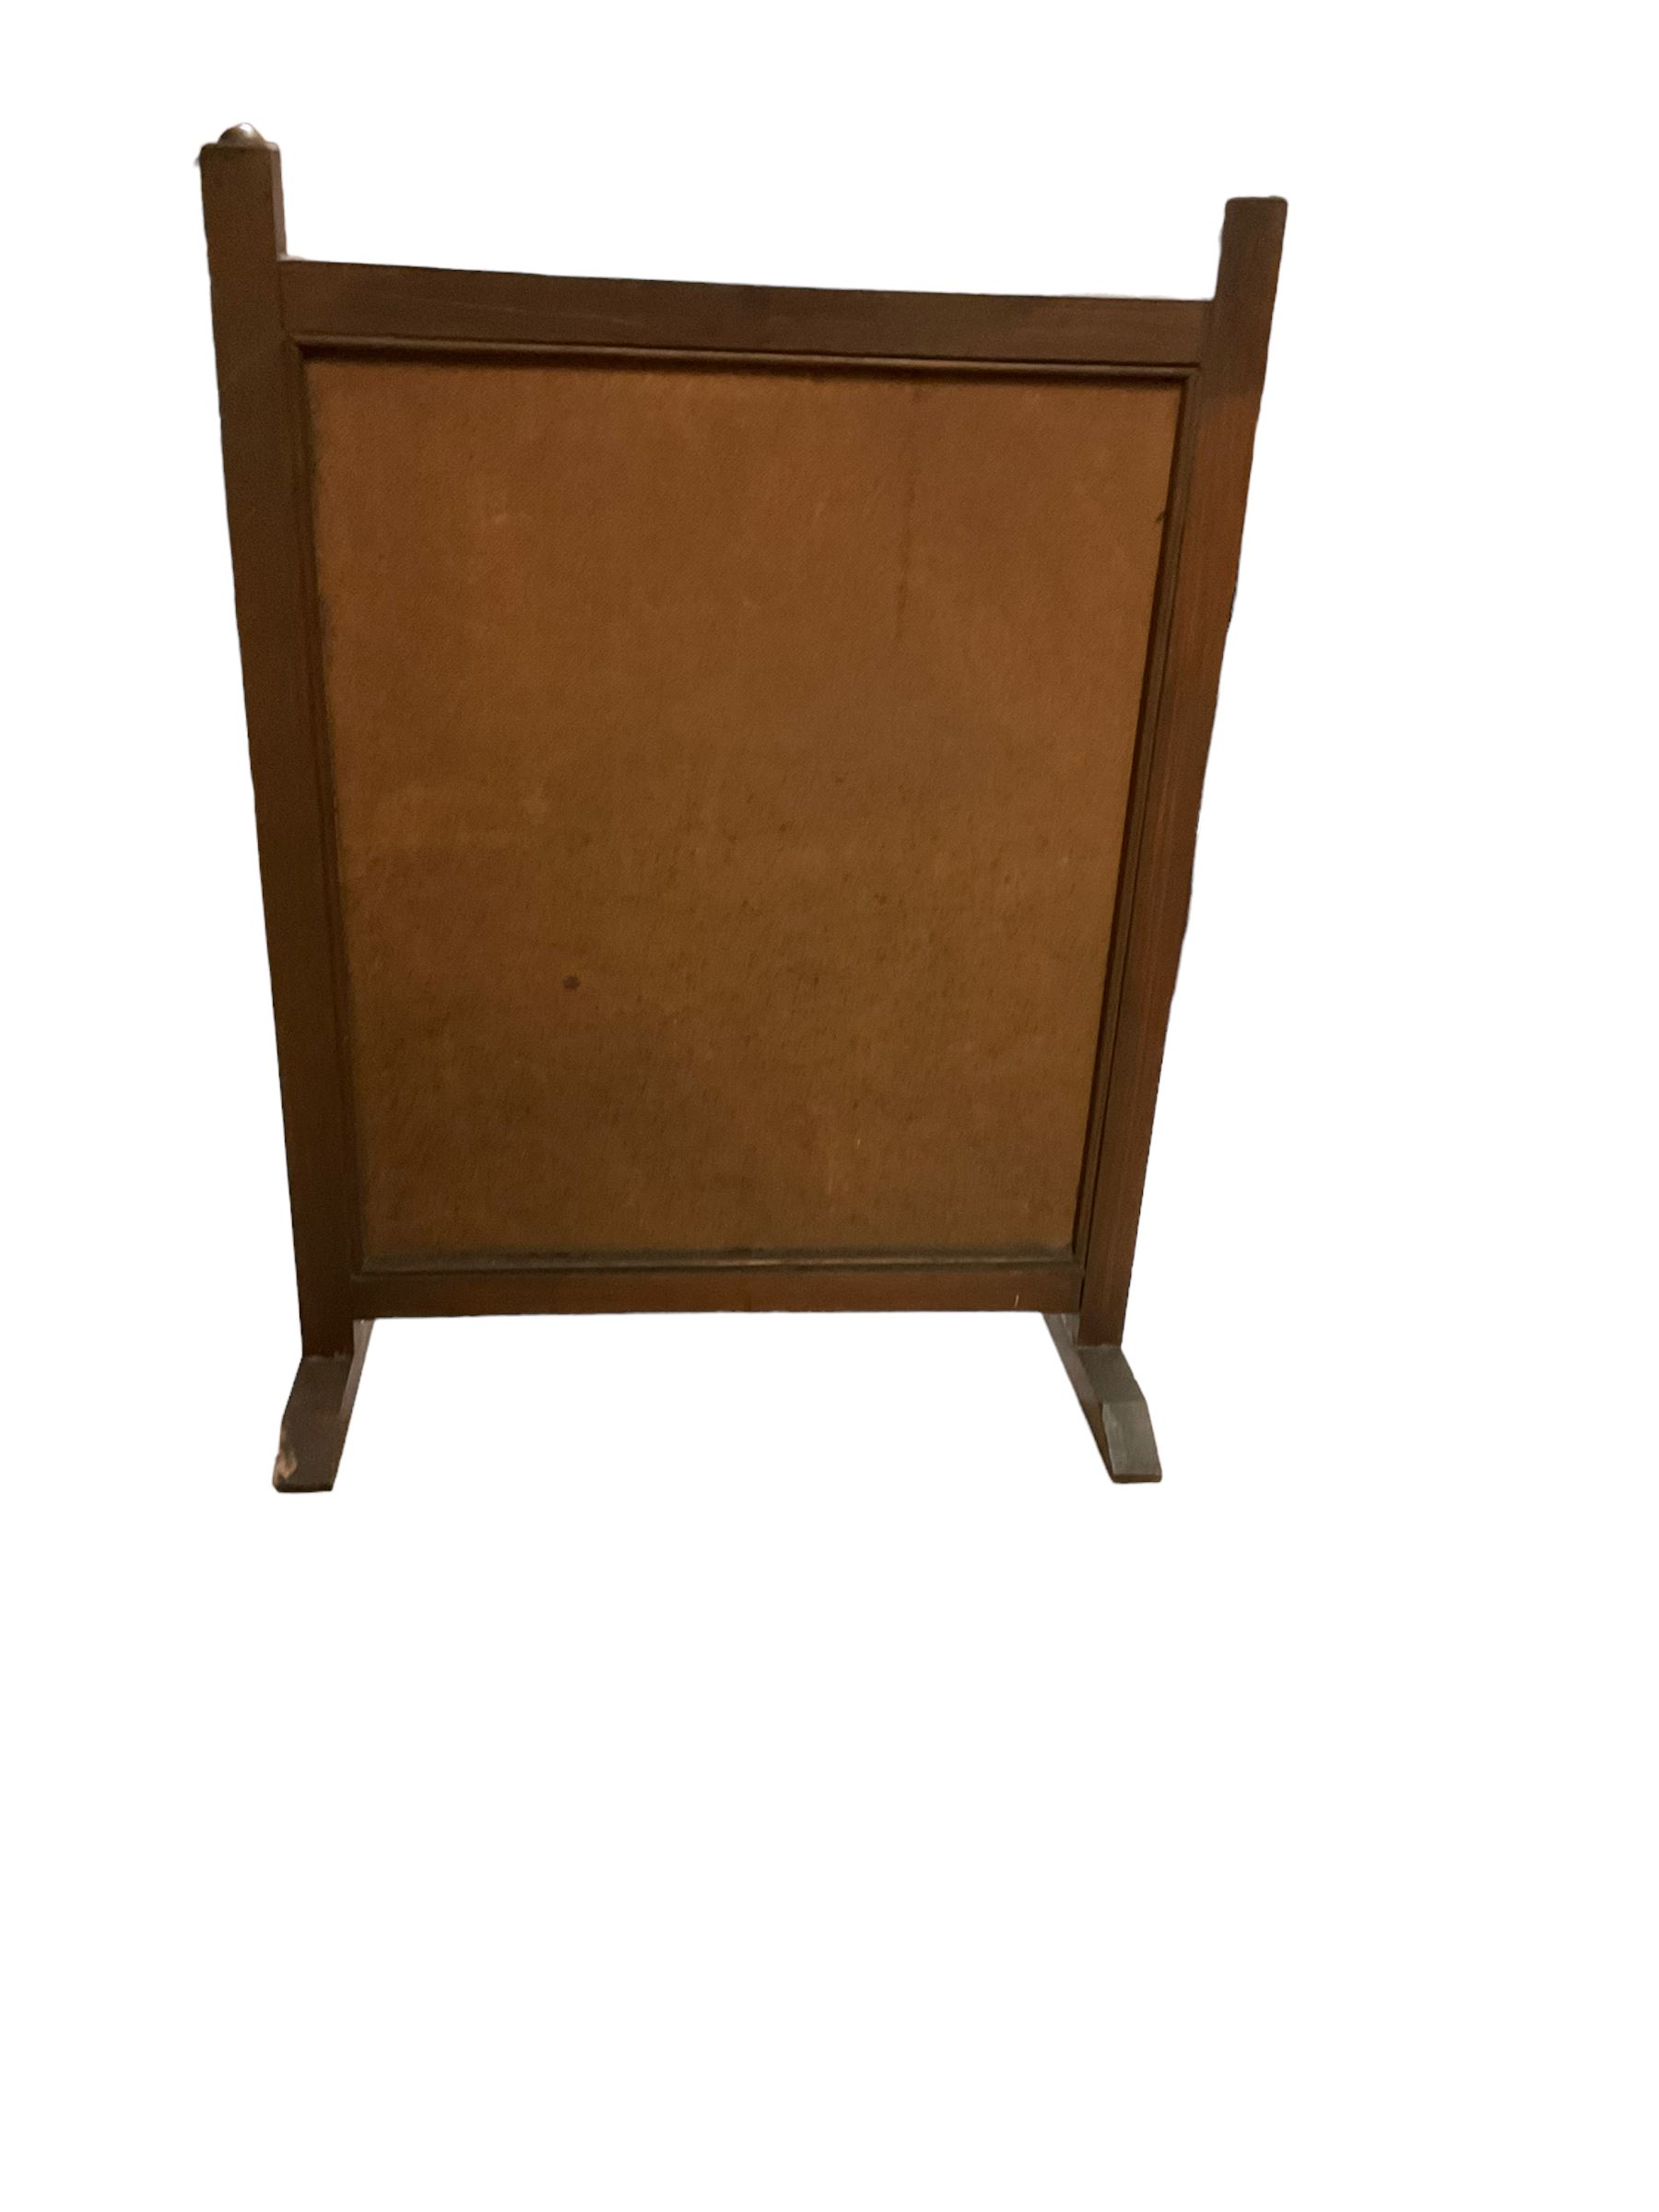 20th century stained wooden fire screen - Image 2 of 3